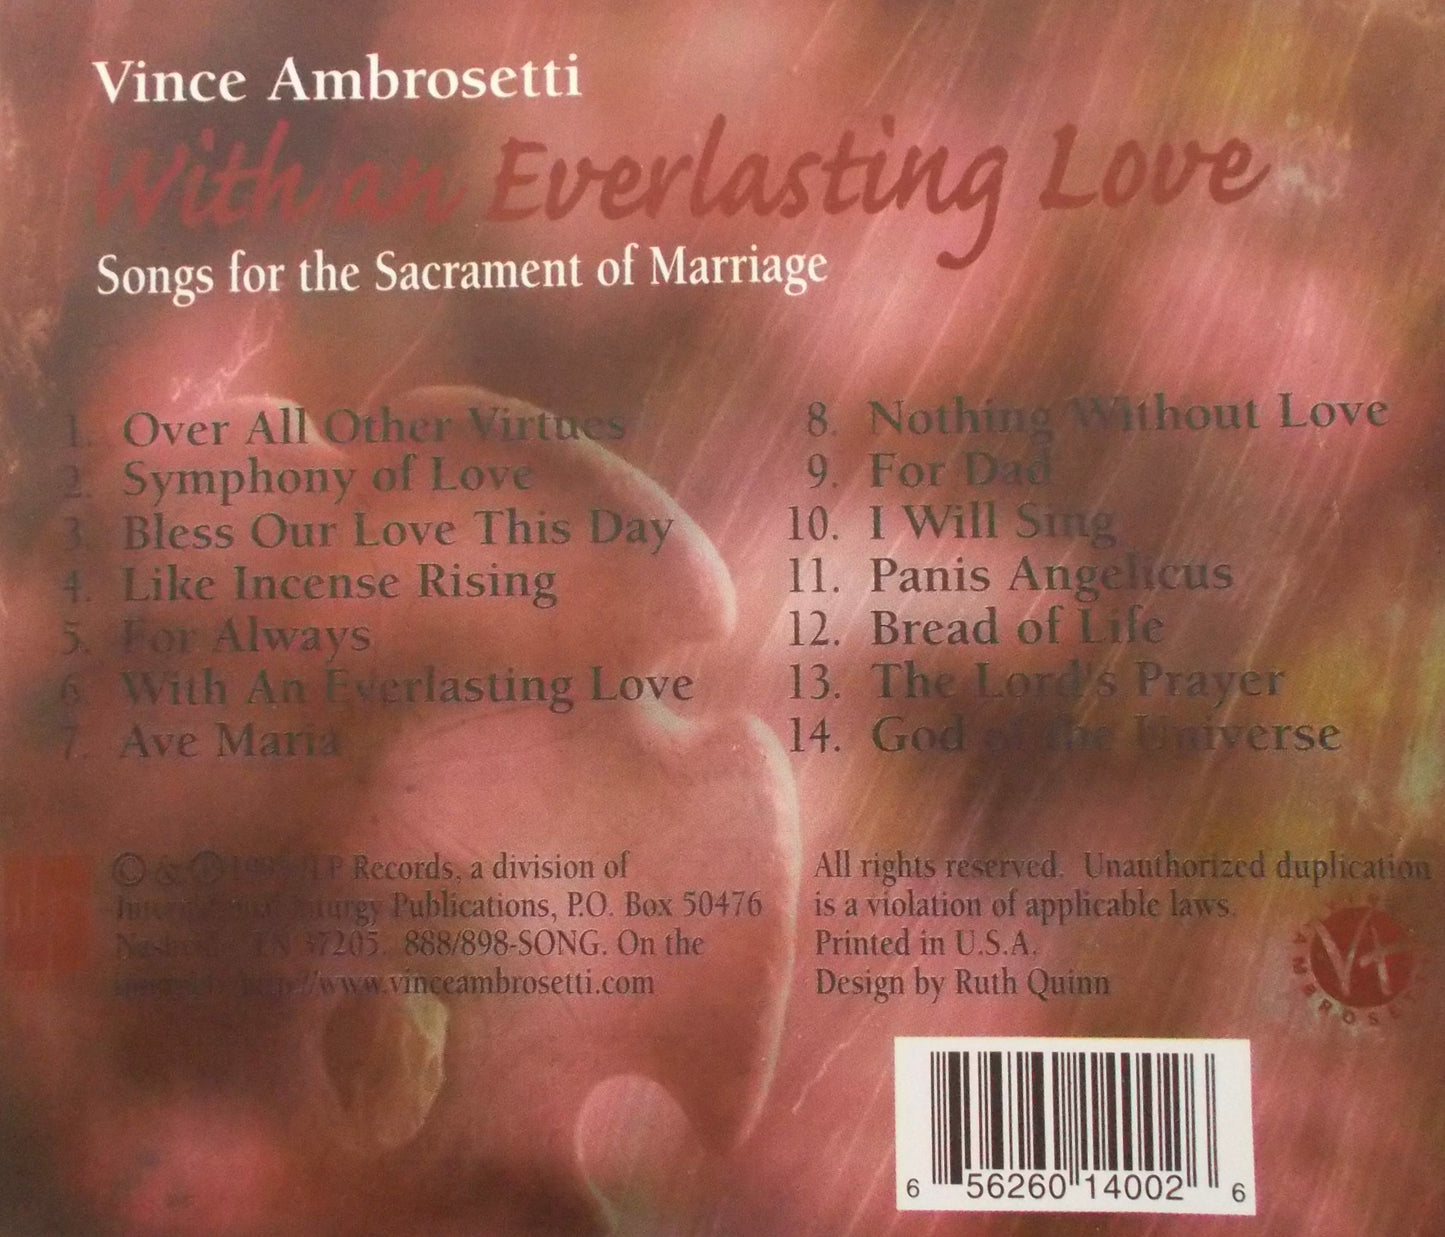 Vince Ambrosetti - With An Everlasting Love - Sacrament of Marriage - Music CD